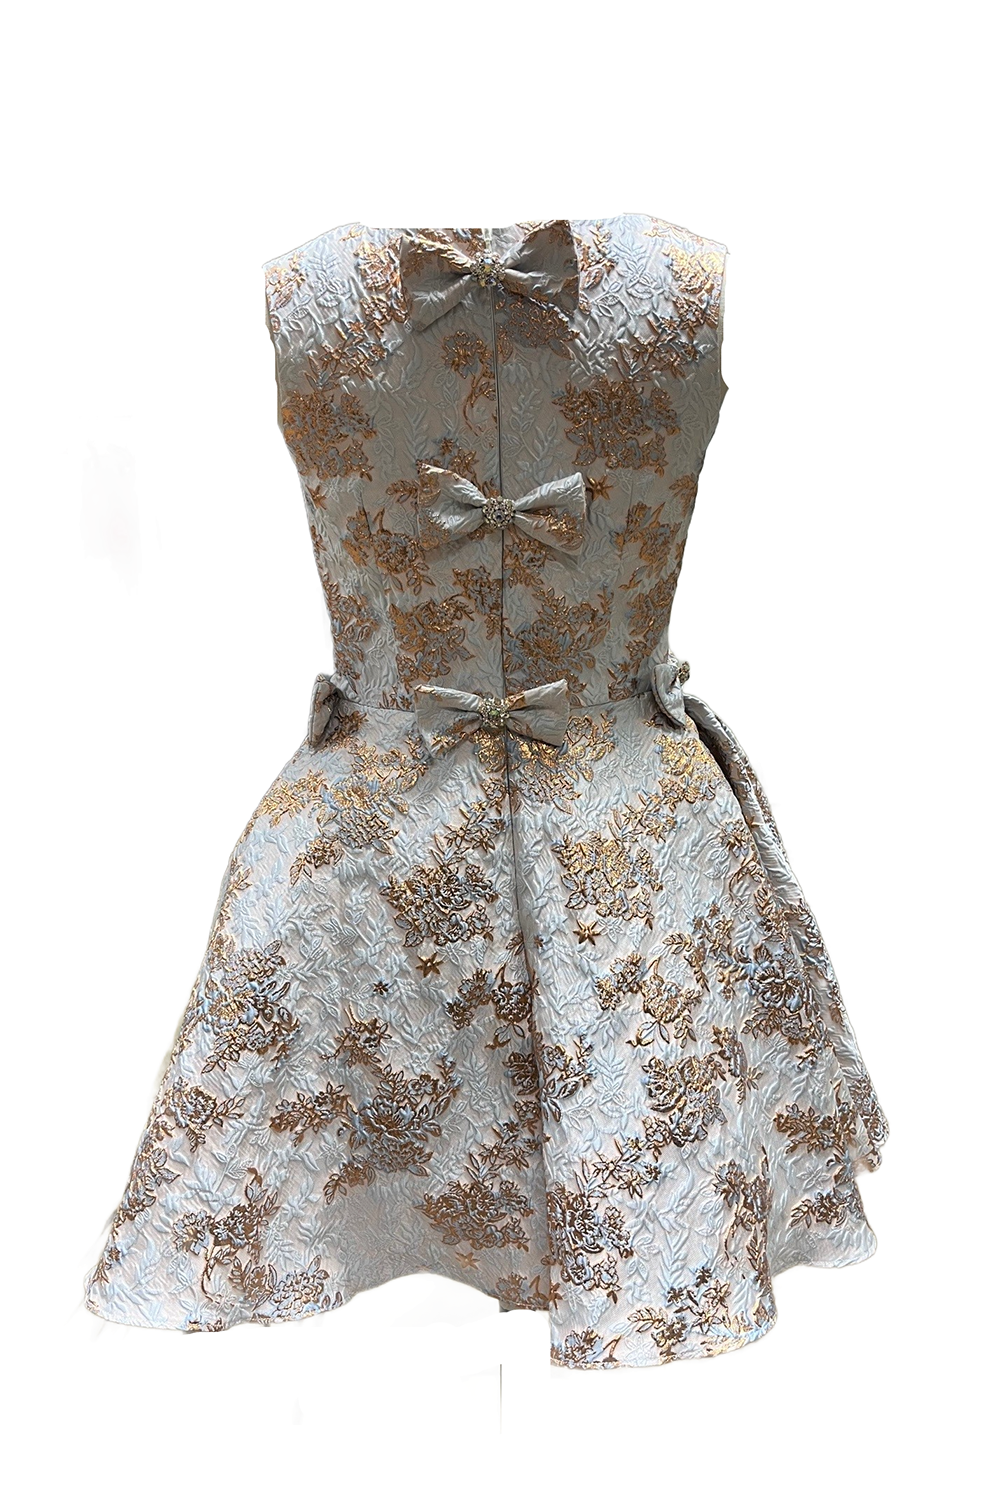 Blue and Bronze Baroque Gown